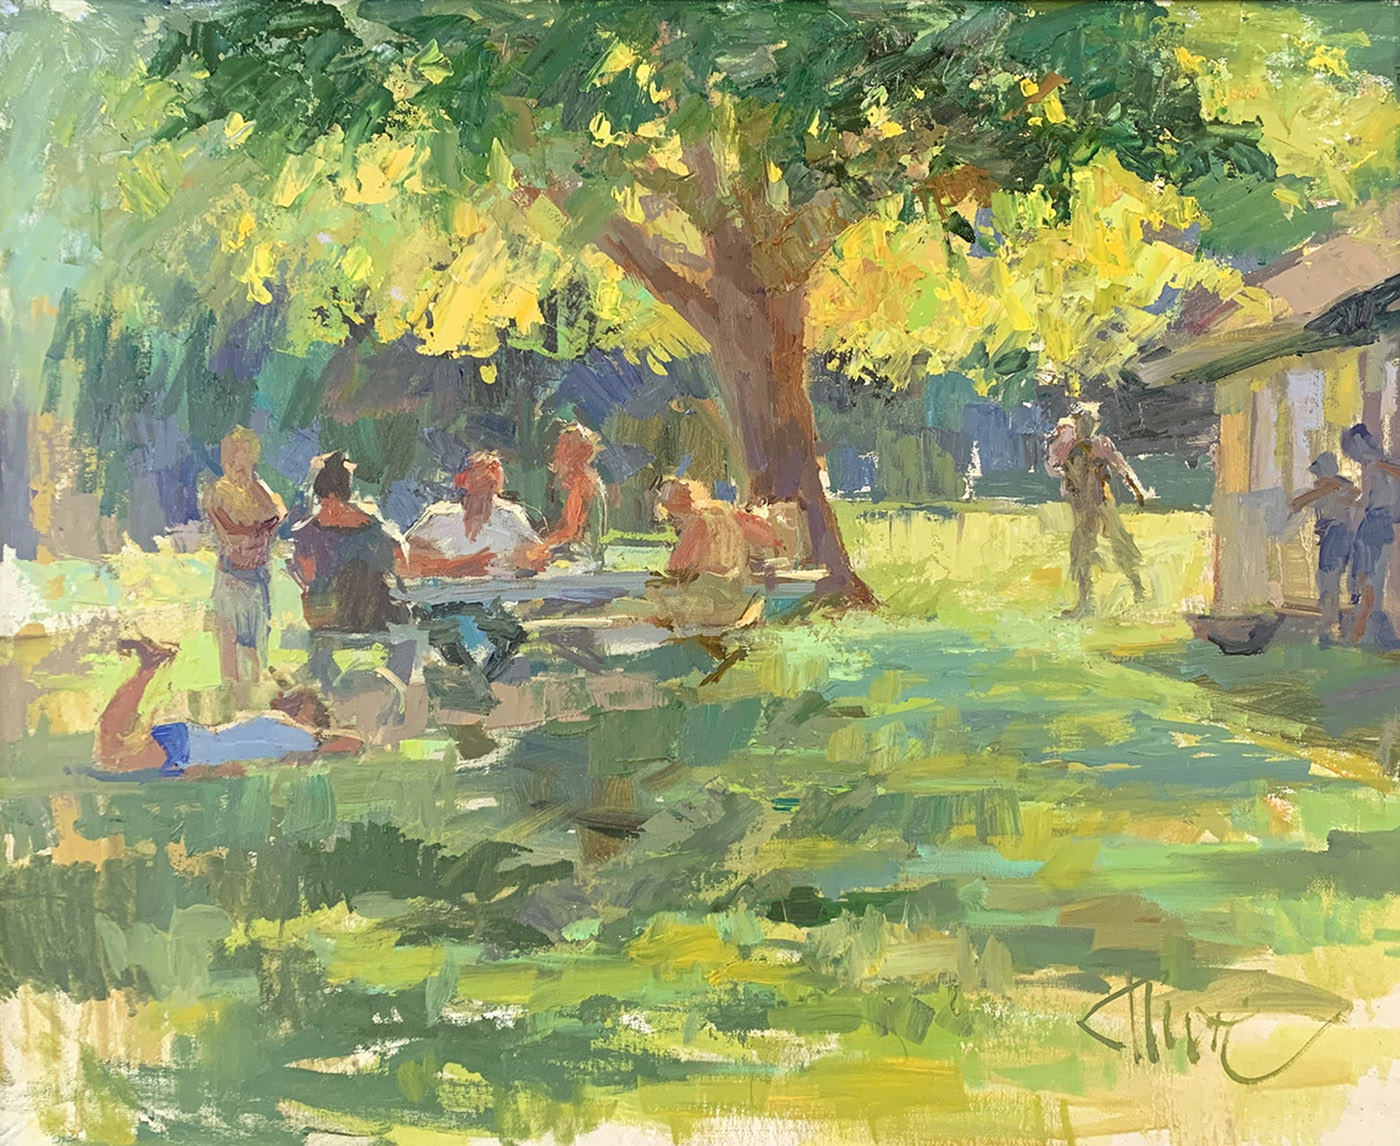 oil painting of people sitting in a park under a tree for shade